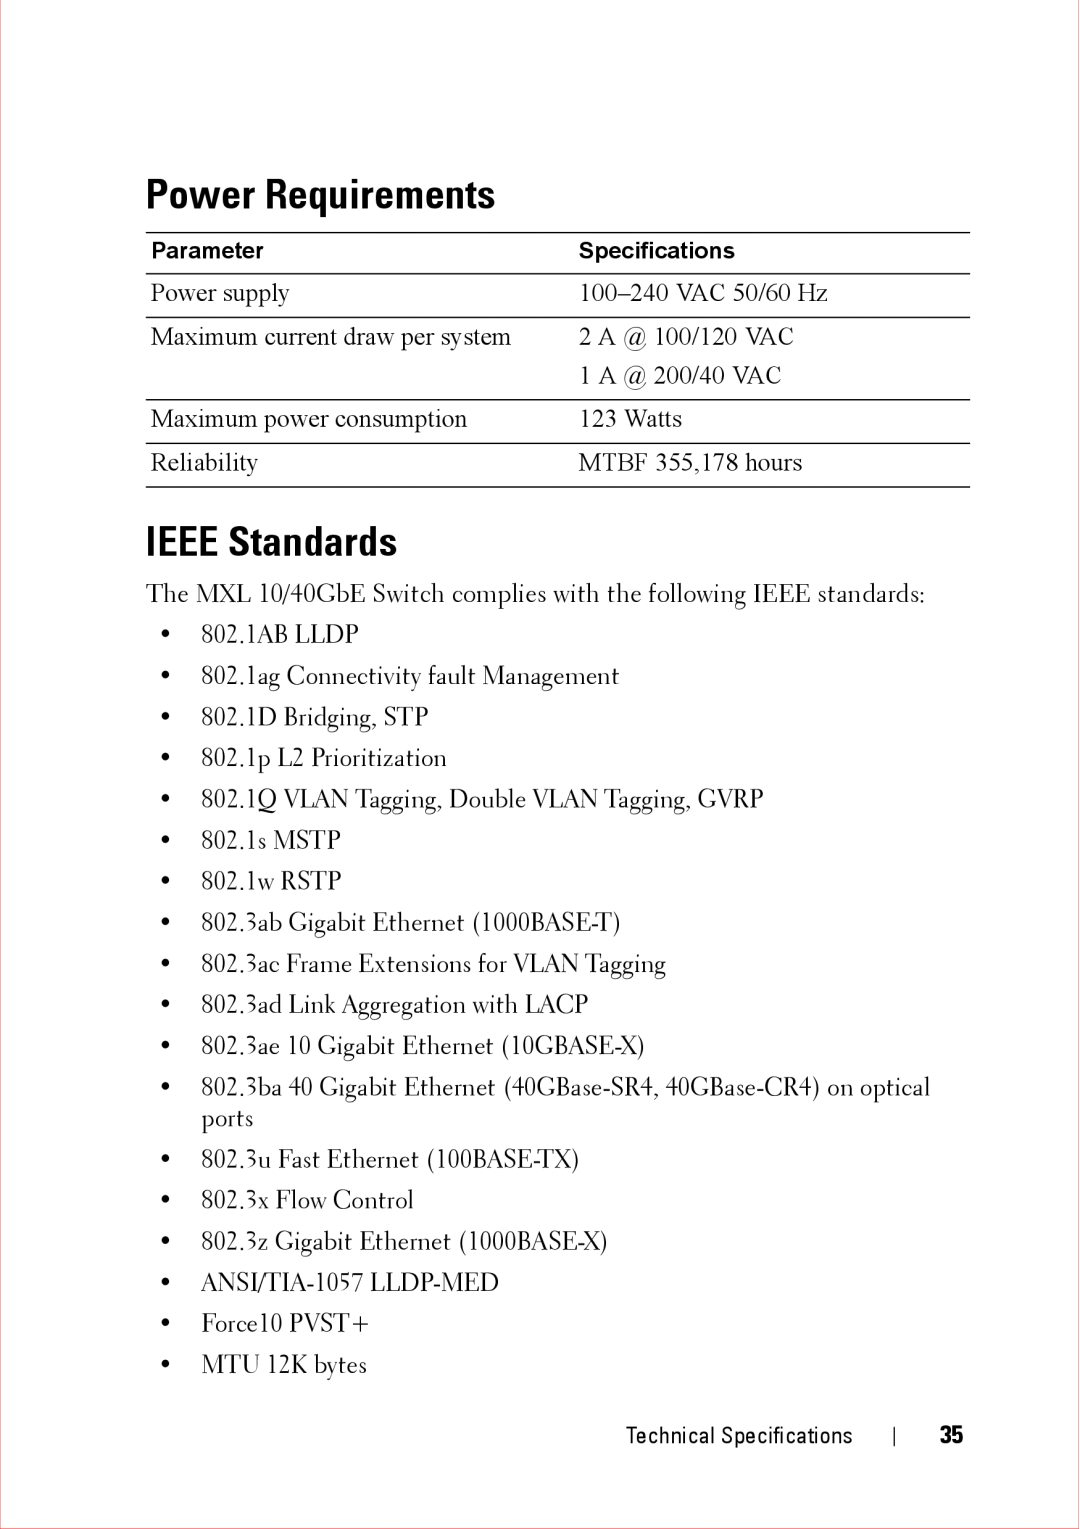 Force10 Networks CC-C-BLNK-LC manual Power Requirements, IEEE Standards 